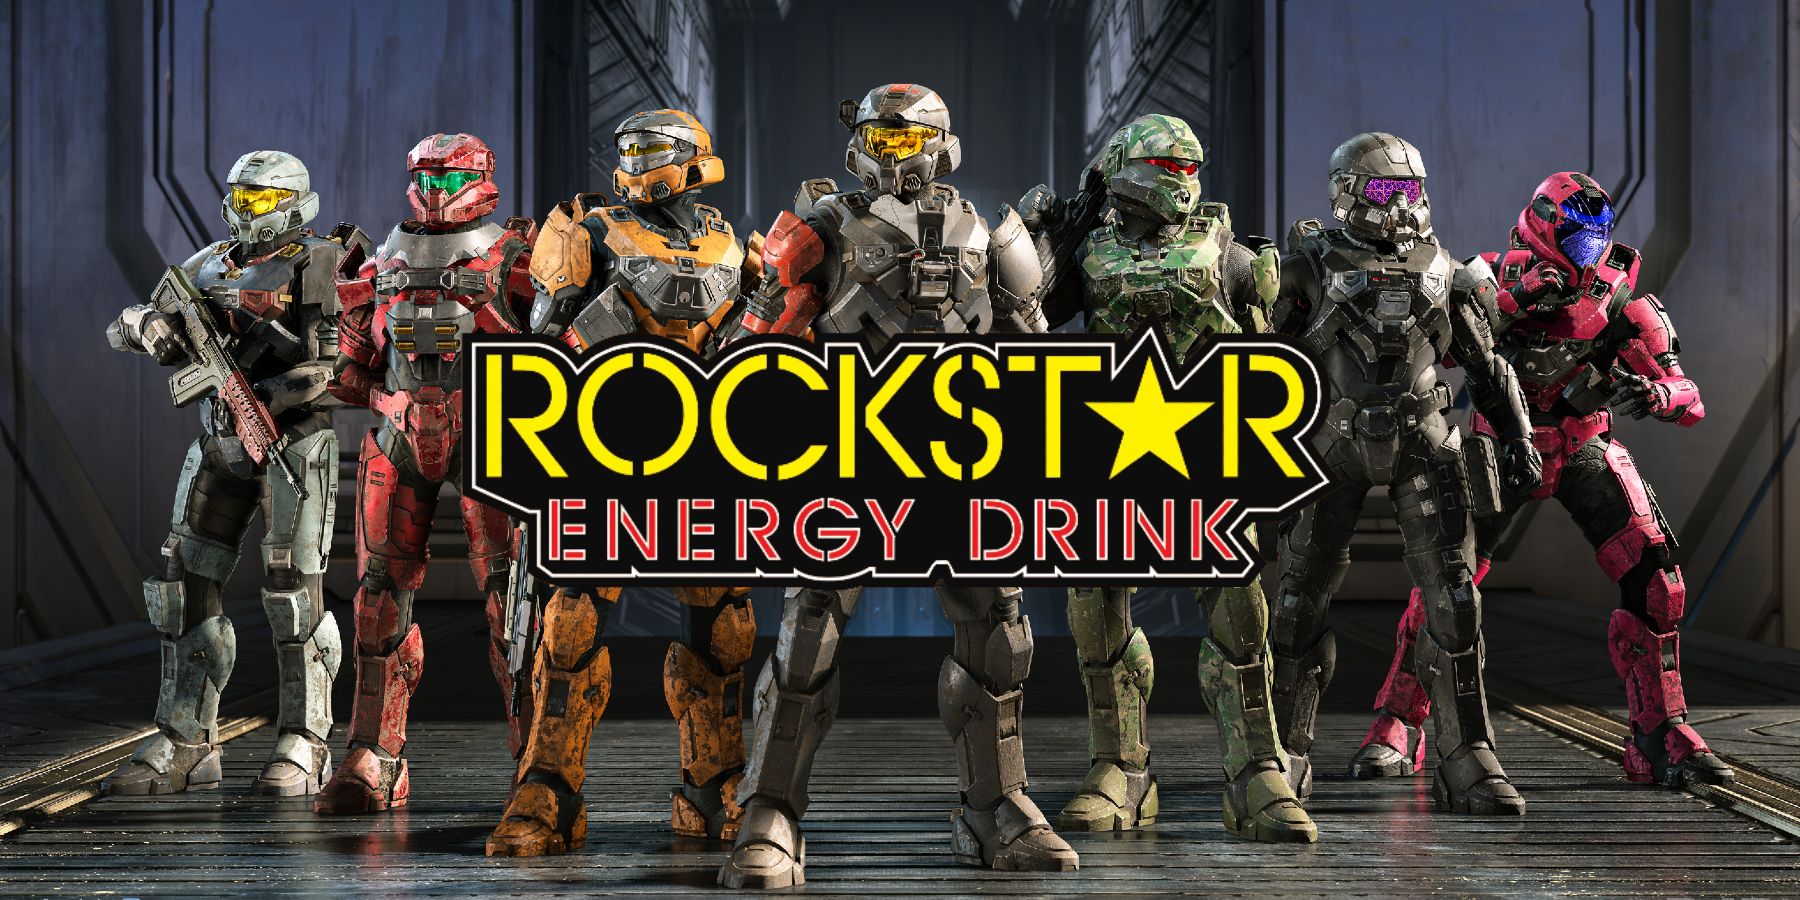 Xbox and Rockstar Energy Drink Unveil Artist-Series Cans Inspired by Halo  Infinite - Xbox Wire